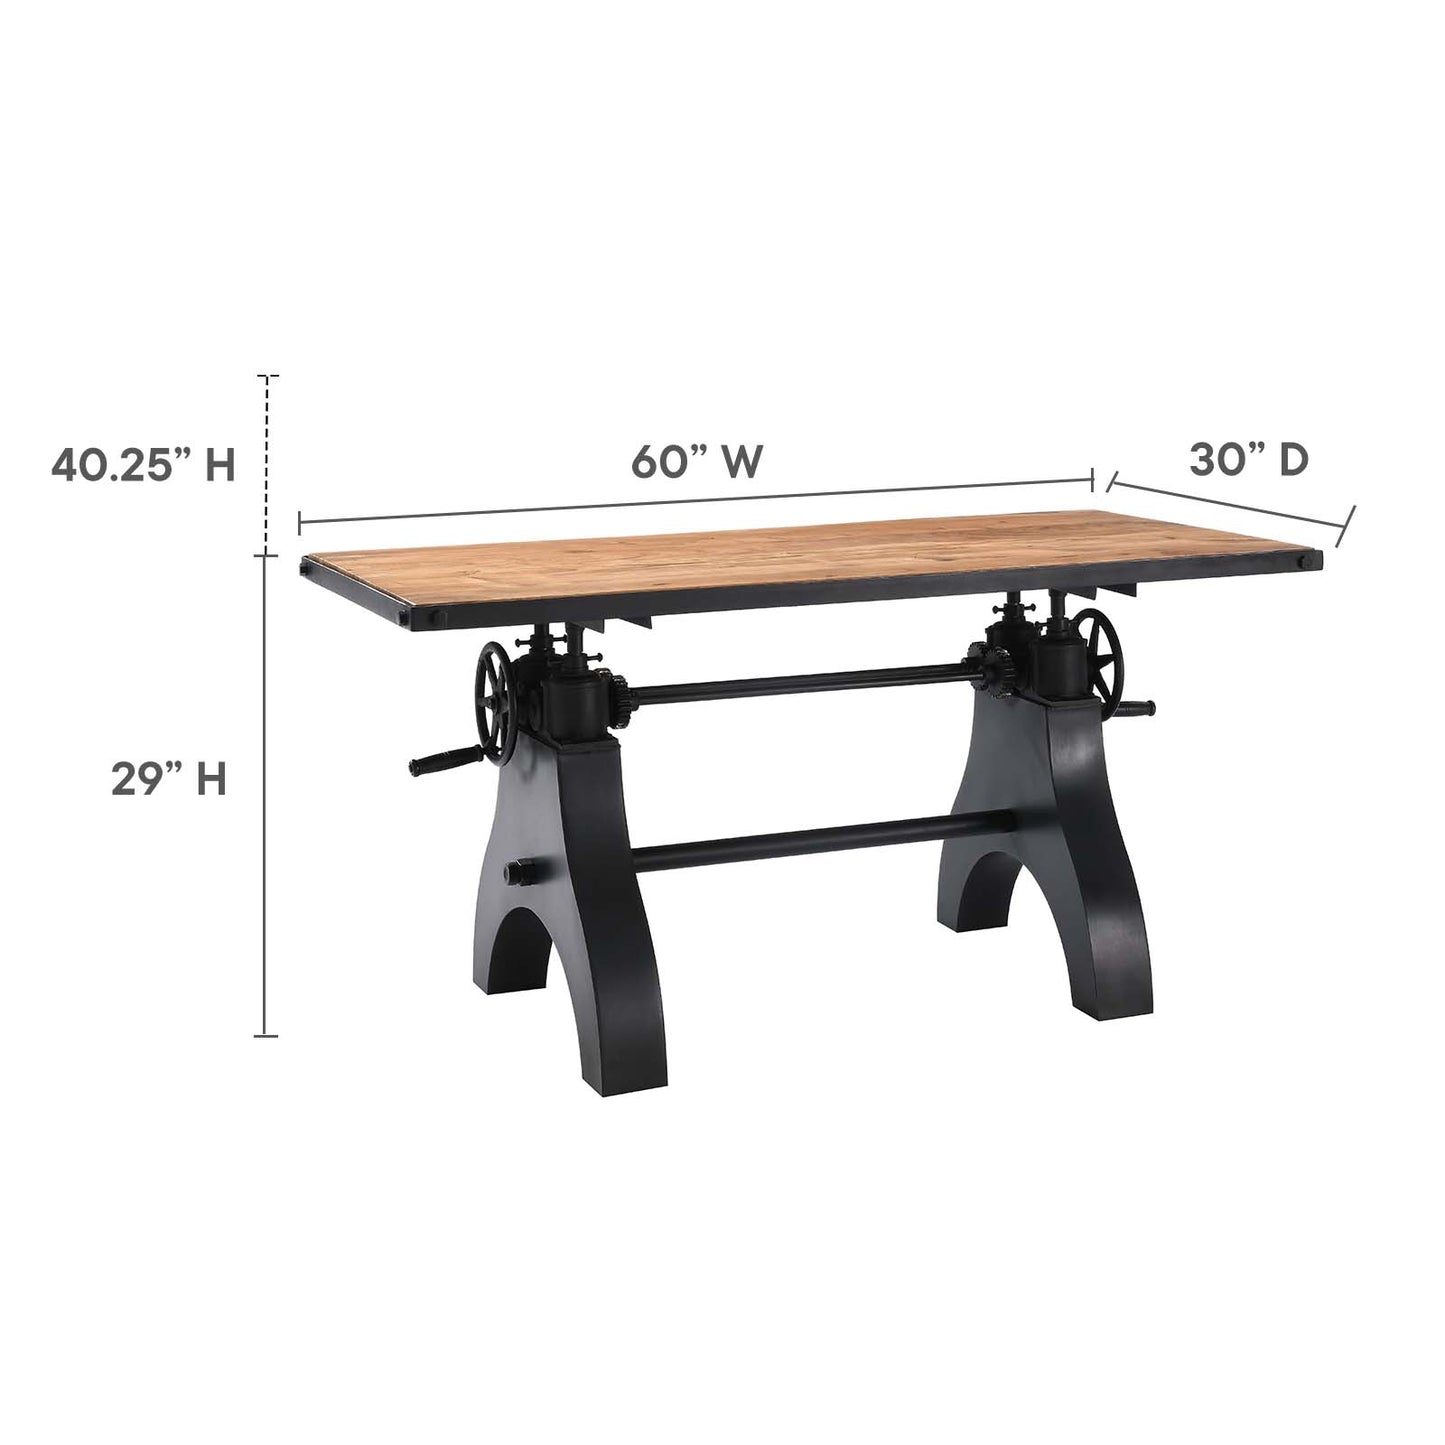 Genuine 60" Crank Adjustable Height Dining Table and Computer Desk By Modway - EEI-6148 | Dining Tables | Modway - 21